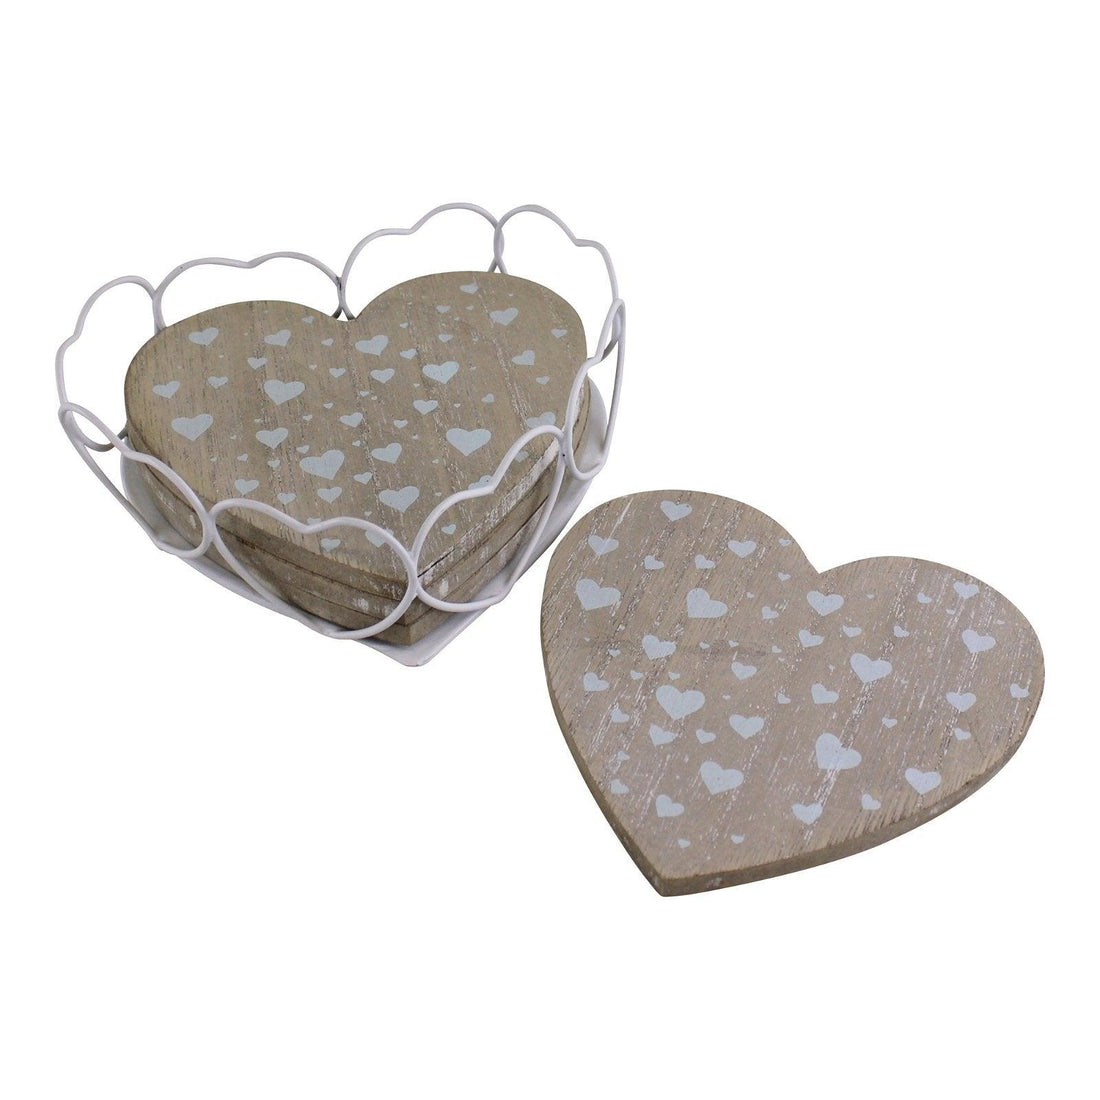 Set Of 4 Heart Shaped Coasters In Wire Holder - £15.99 - Coasters & Placemats 